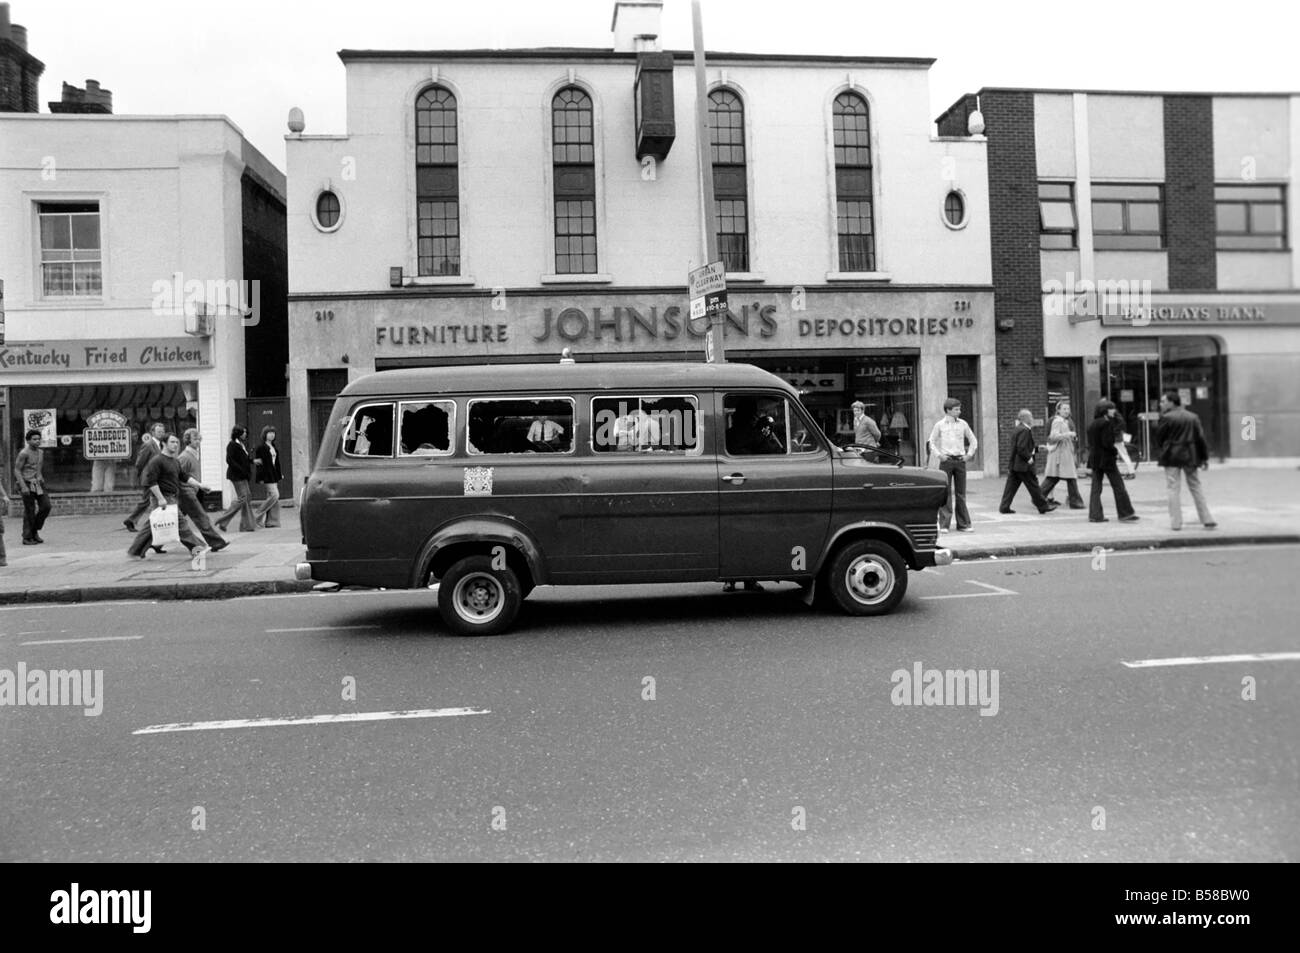 Lewisham Riot 1977 : A police transit van with its windows smashed seen here in Lewisham high street following clashes between extremists on the Right and Left. The riot was sparked by a National Front march through the centre of town, which was confronted by a left wing counter demonstration. August 1977 77-04357-015 Stock Photo